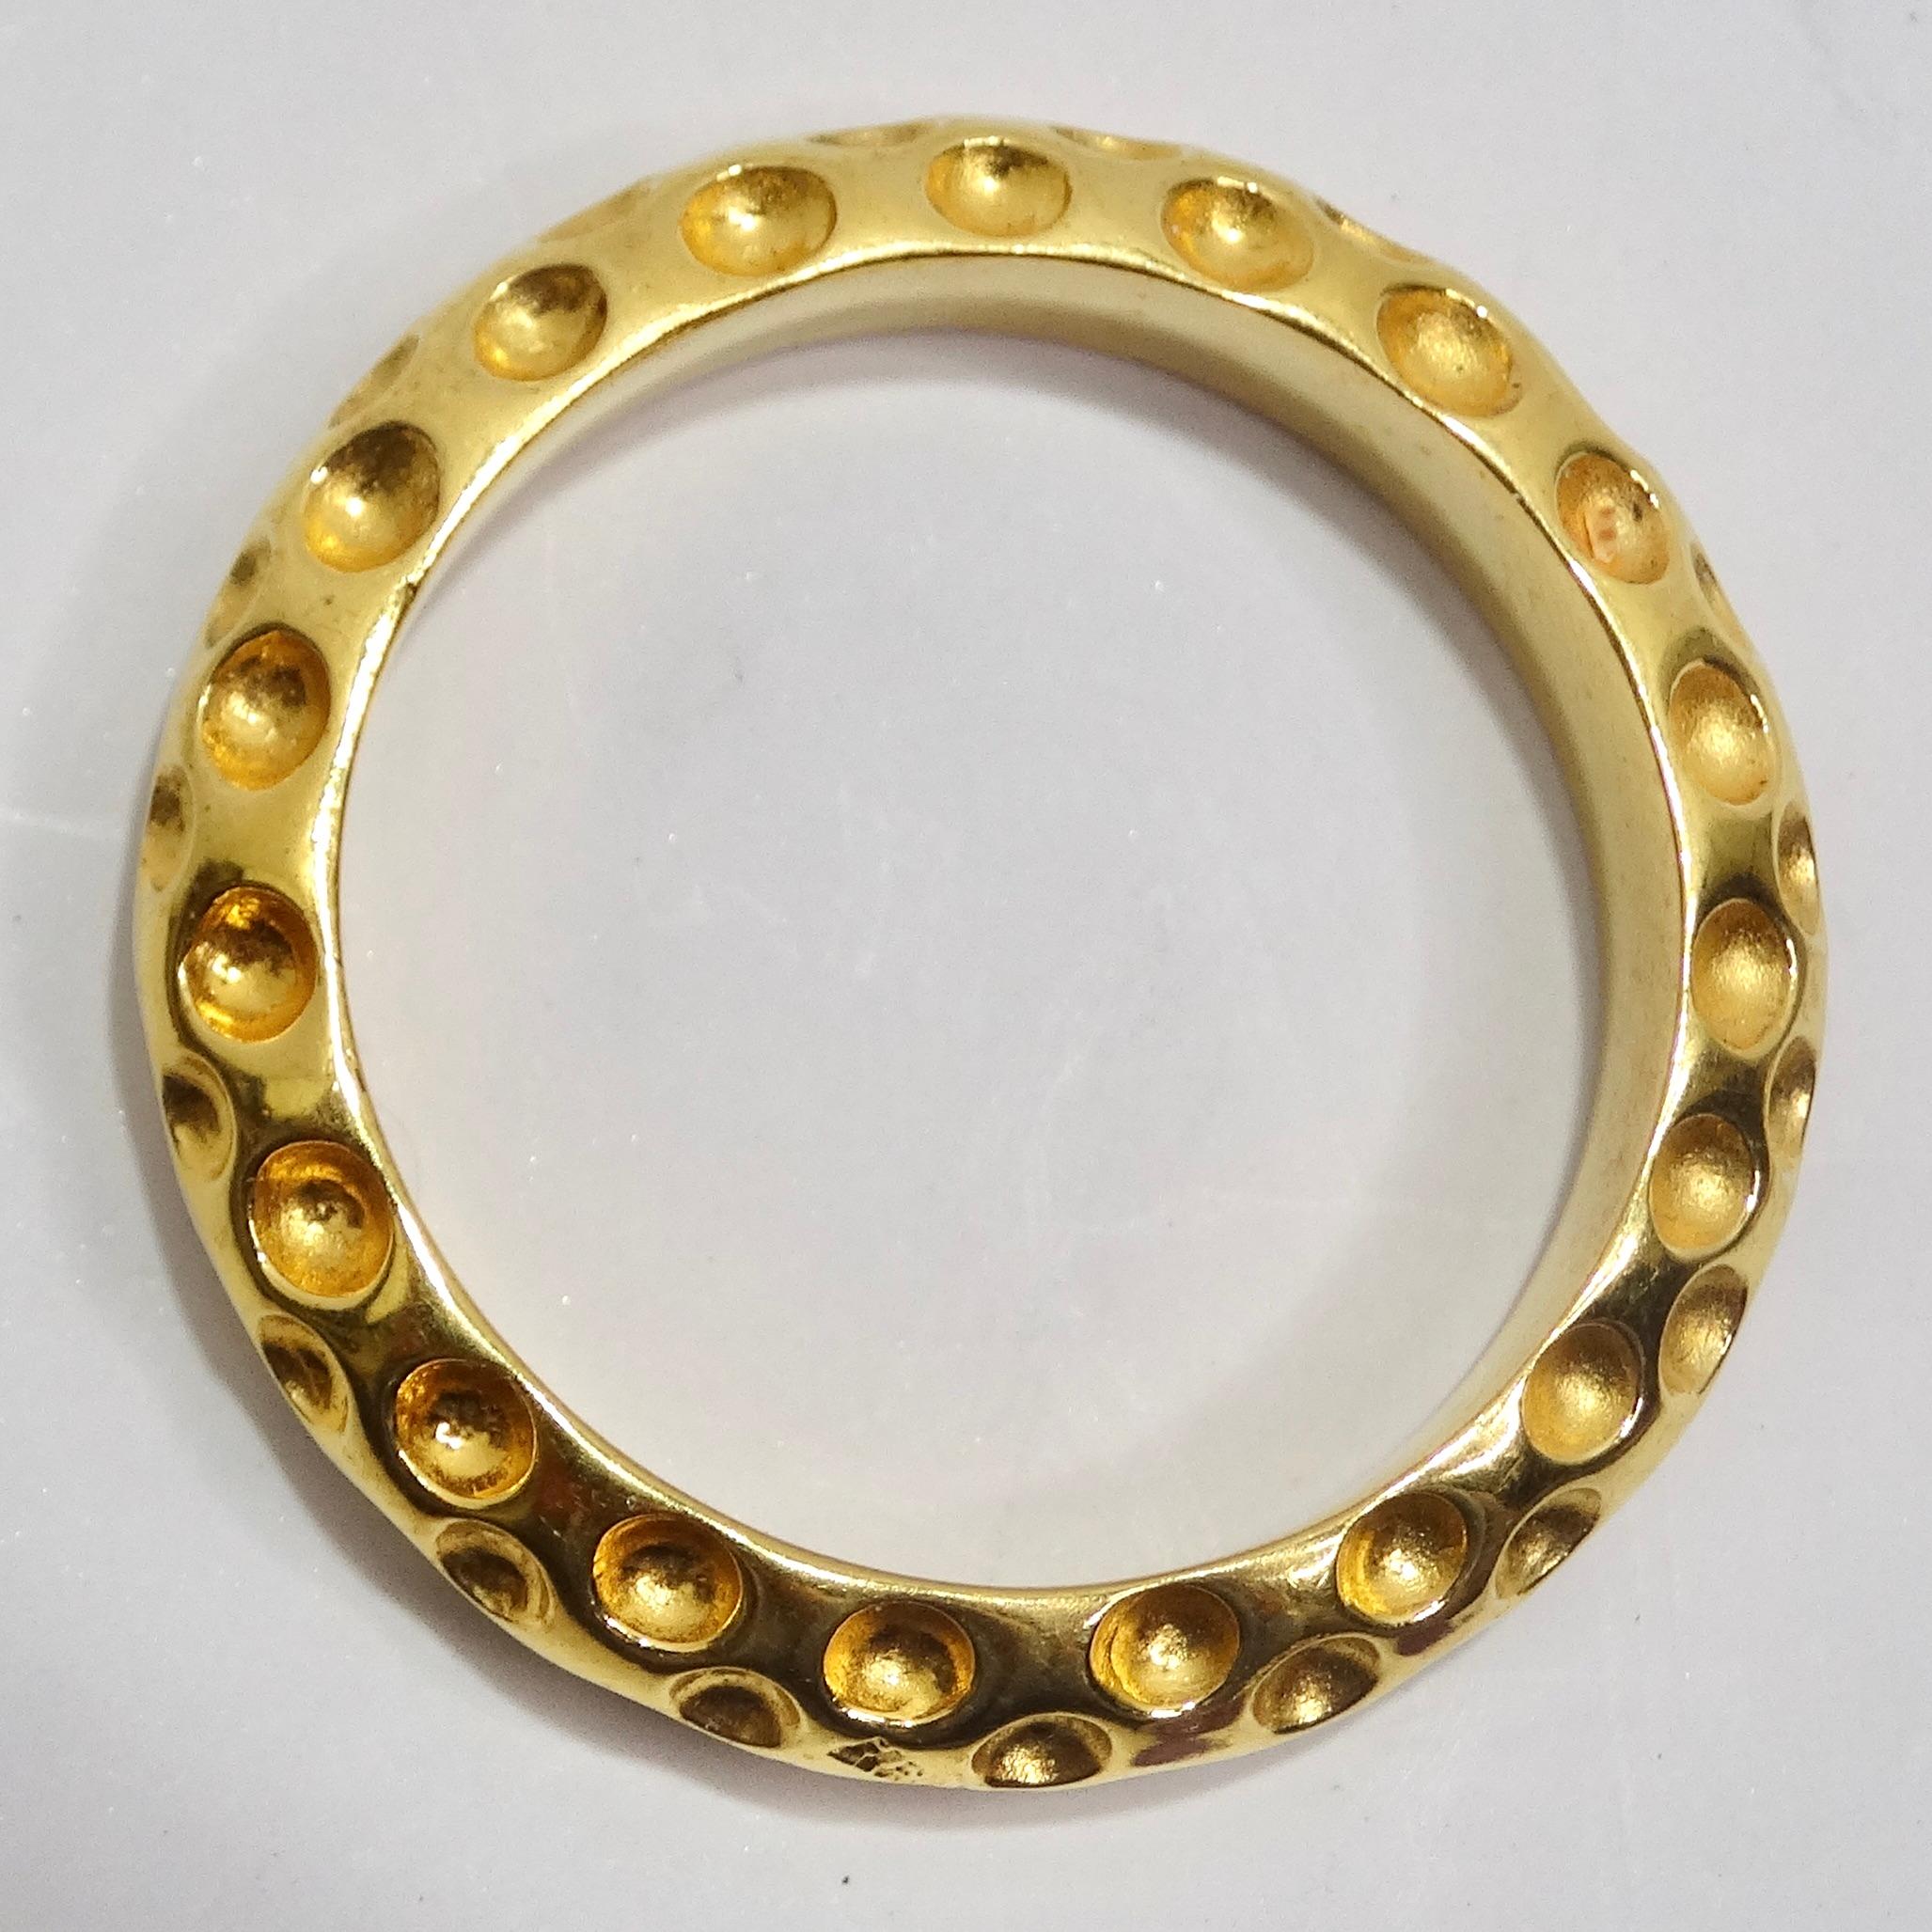 Hermes 24K Gold Plated Scarf Ring In Excellent Condition For Sale In Scottsdale, AZ